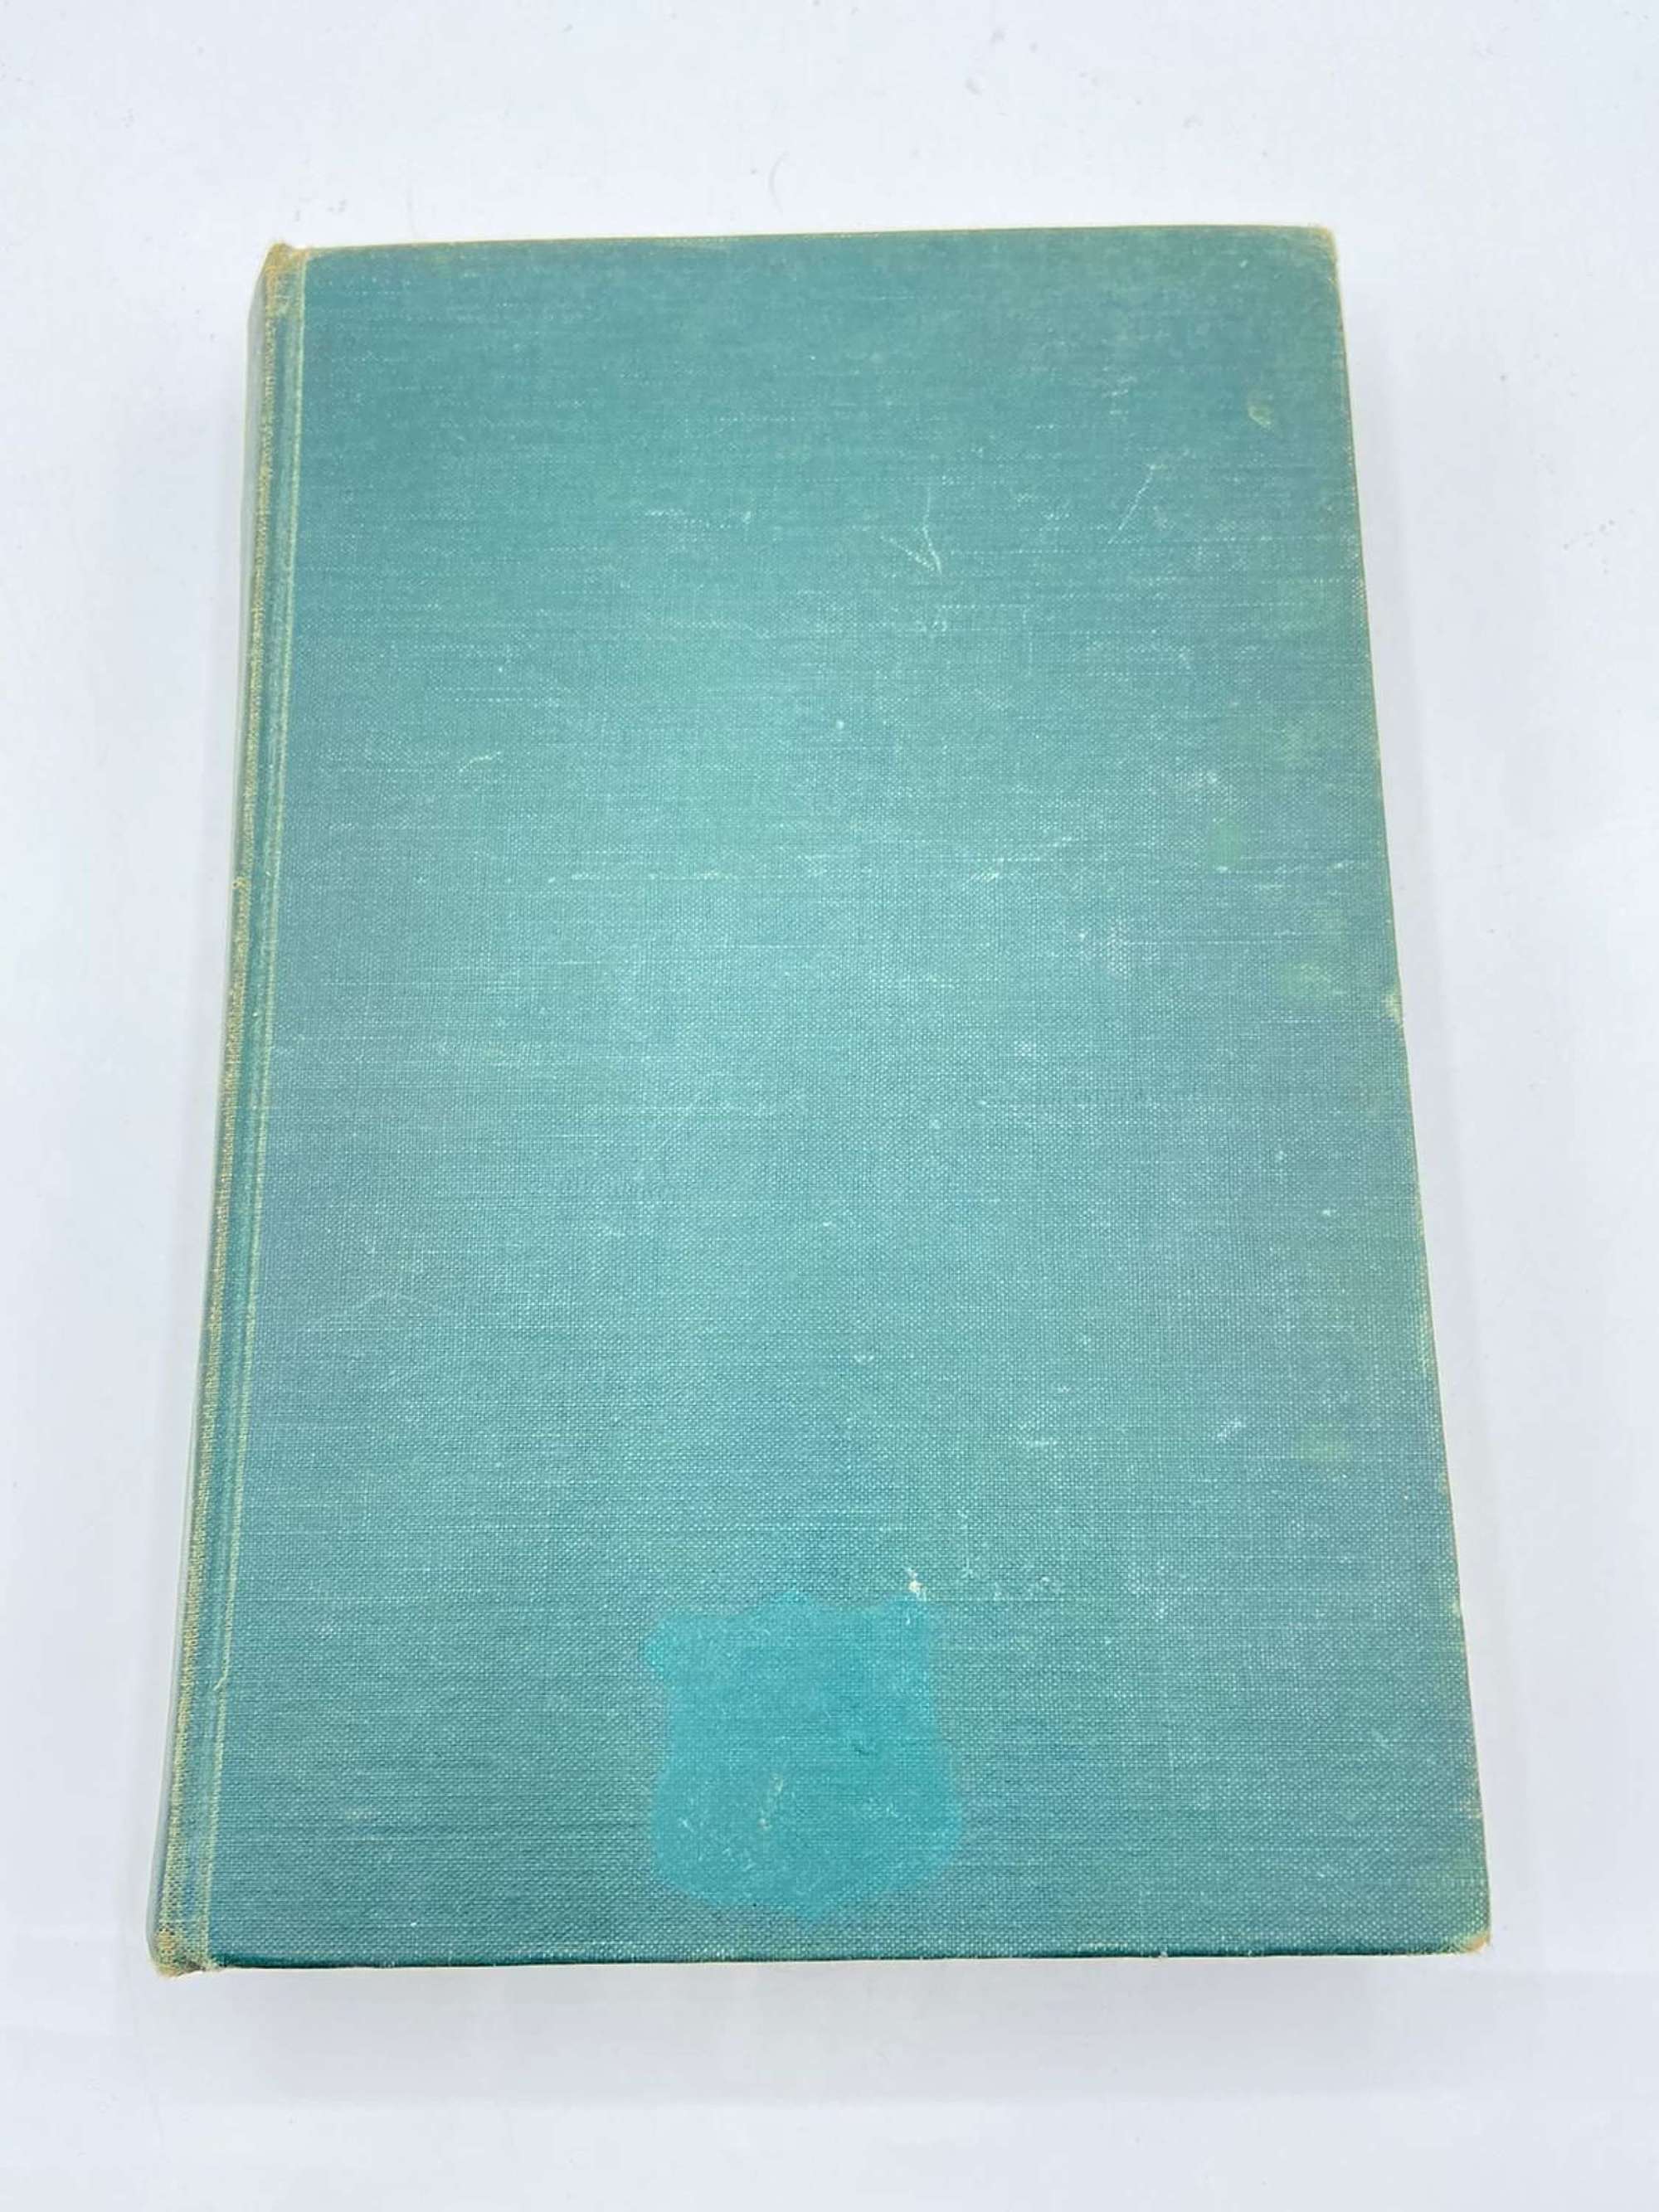 WW2 1st Edition Book: The Greatest Raid Of All By C.E. Lucas Phillips